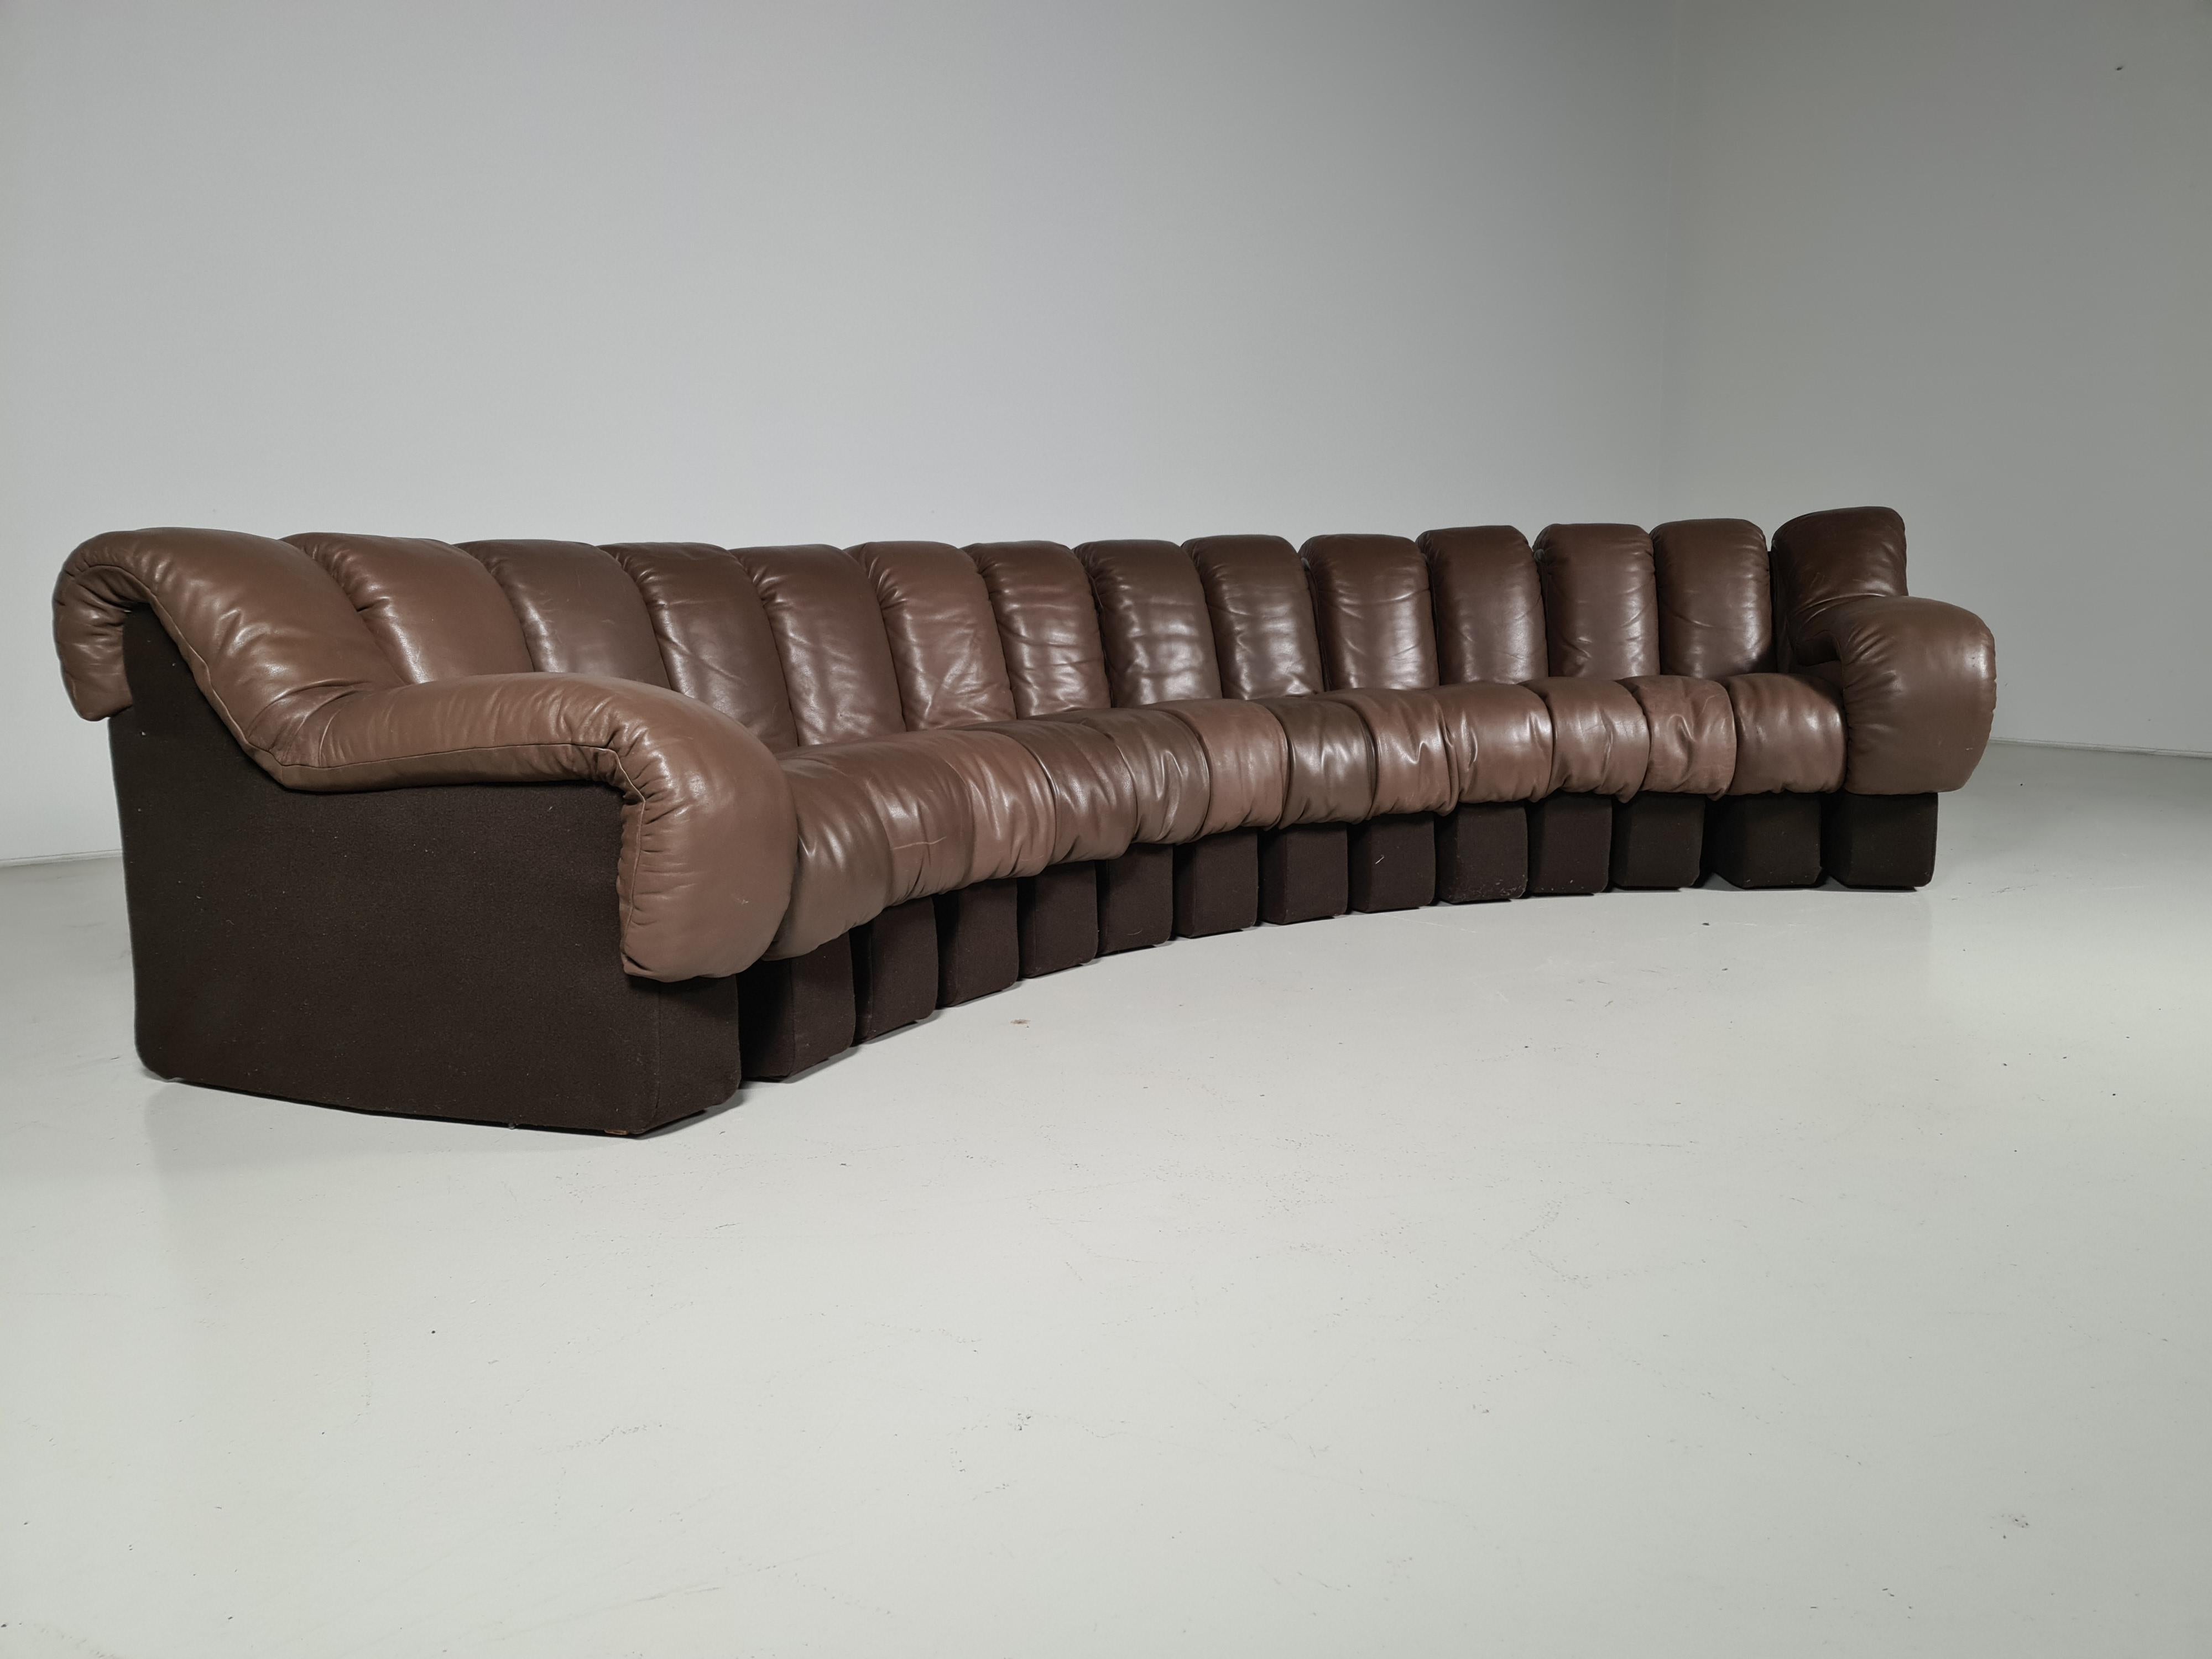 De Sede DS 600 “Non-Stop” sectional leather sofa by Heinz Ulrich, Ueli Berger and Elenora Peduzzi-Riva from the 1970s. Original brown leather seating with brown felt bases. 14 pieces, all of which hook and zip together. We have 2 sofa's available.